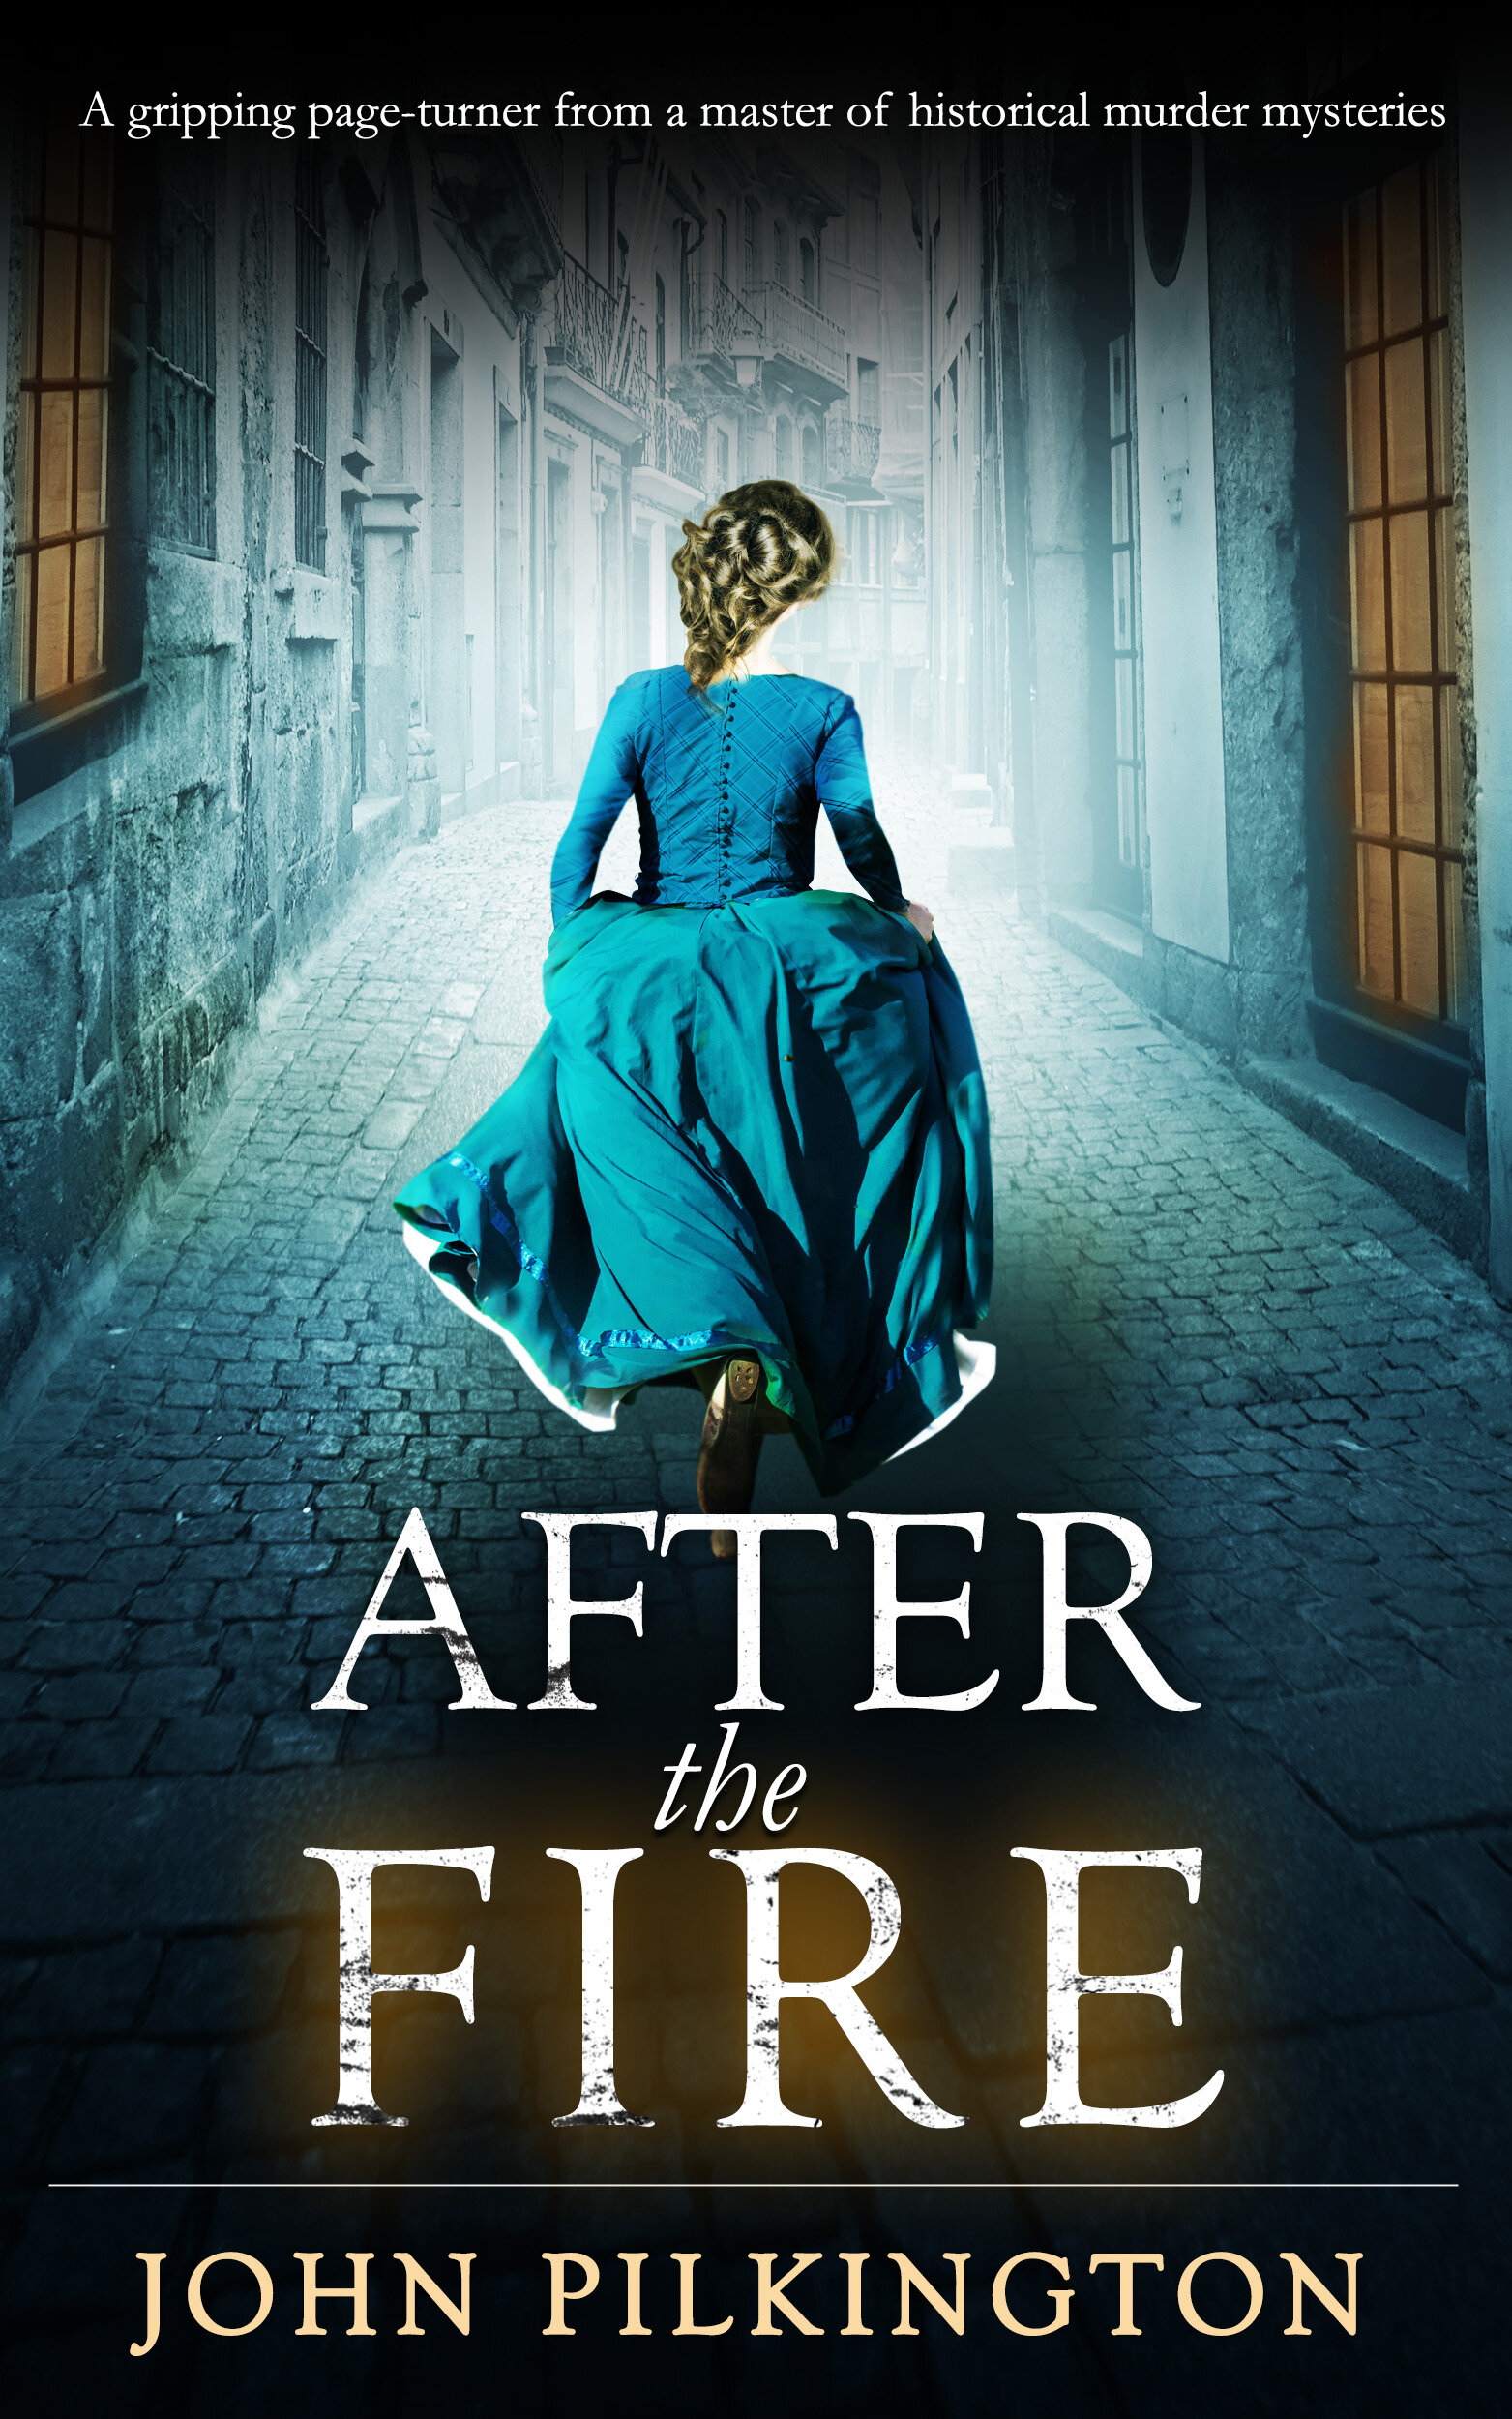 After The Fire publish cover.jpg